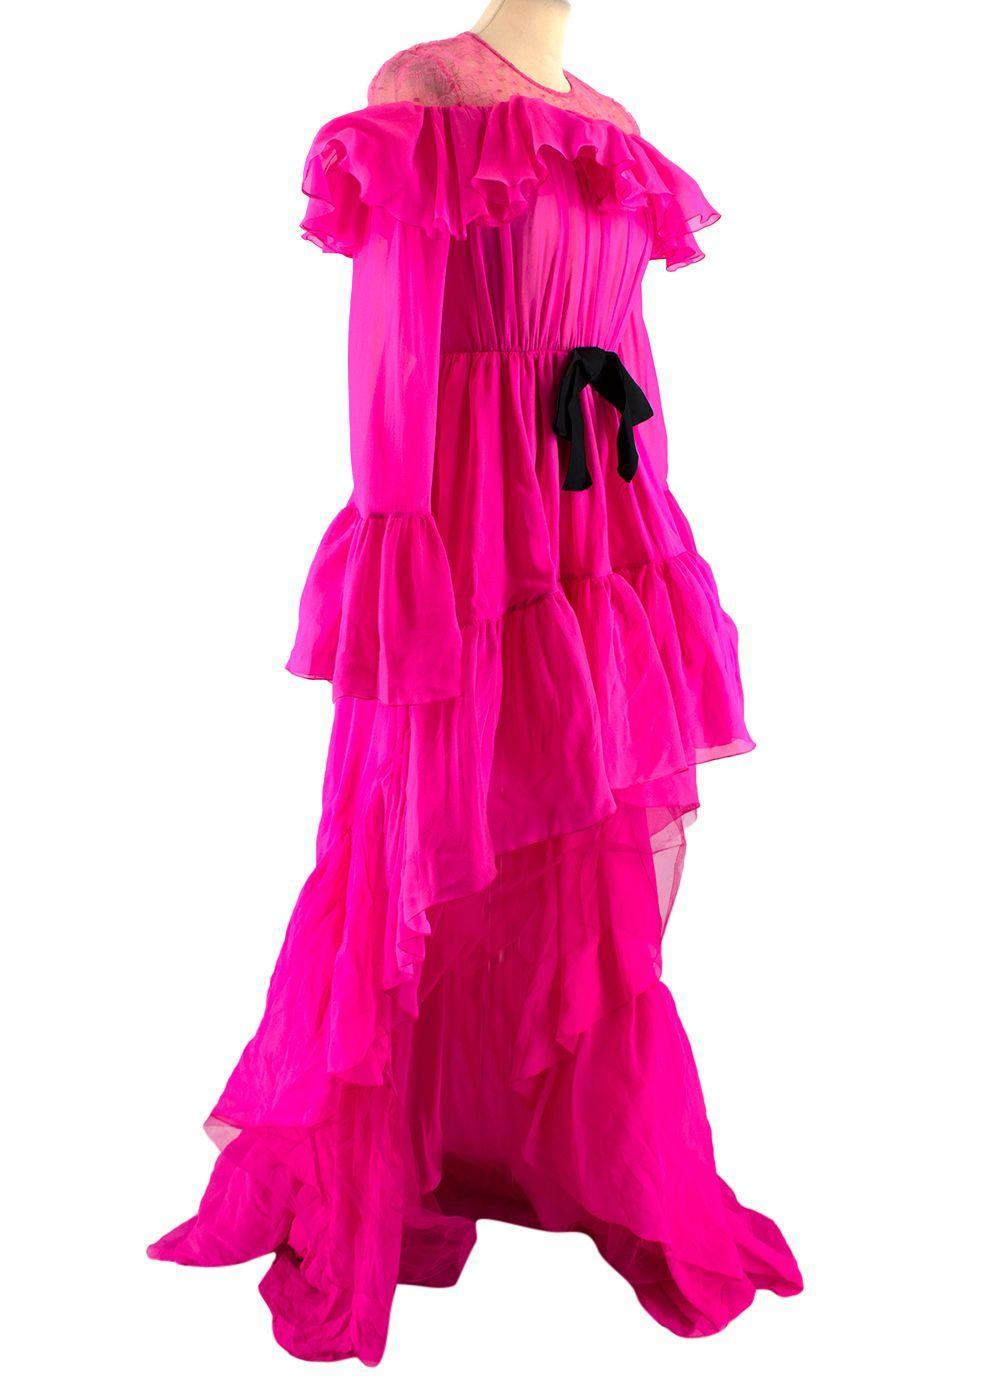 Giambattista Valli Hot Pink Silk Ruffled Gown with Lace Shoulders and Black Bow. Size 38

- Ruffled long sleeves silk gown in hot pink with black waist bow 
- Pink lace shoulder and chest panel
- Long sleeves with flared cuffs
- Boning inside the